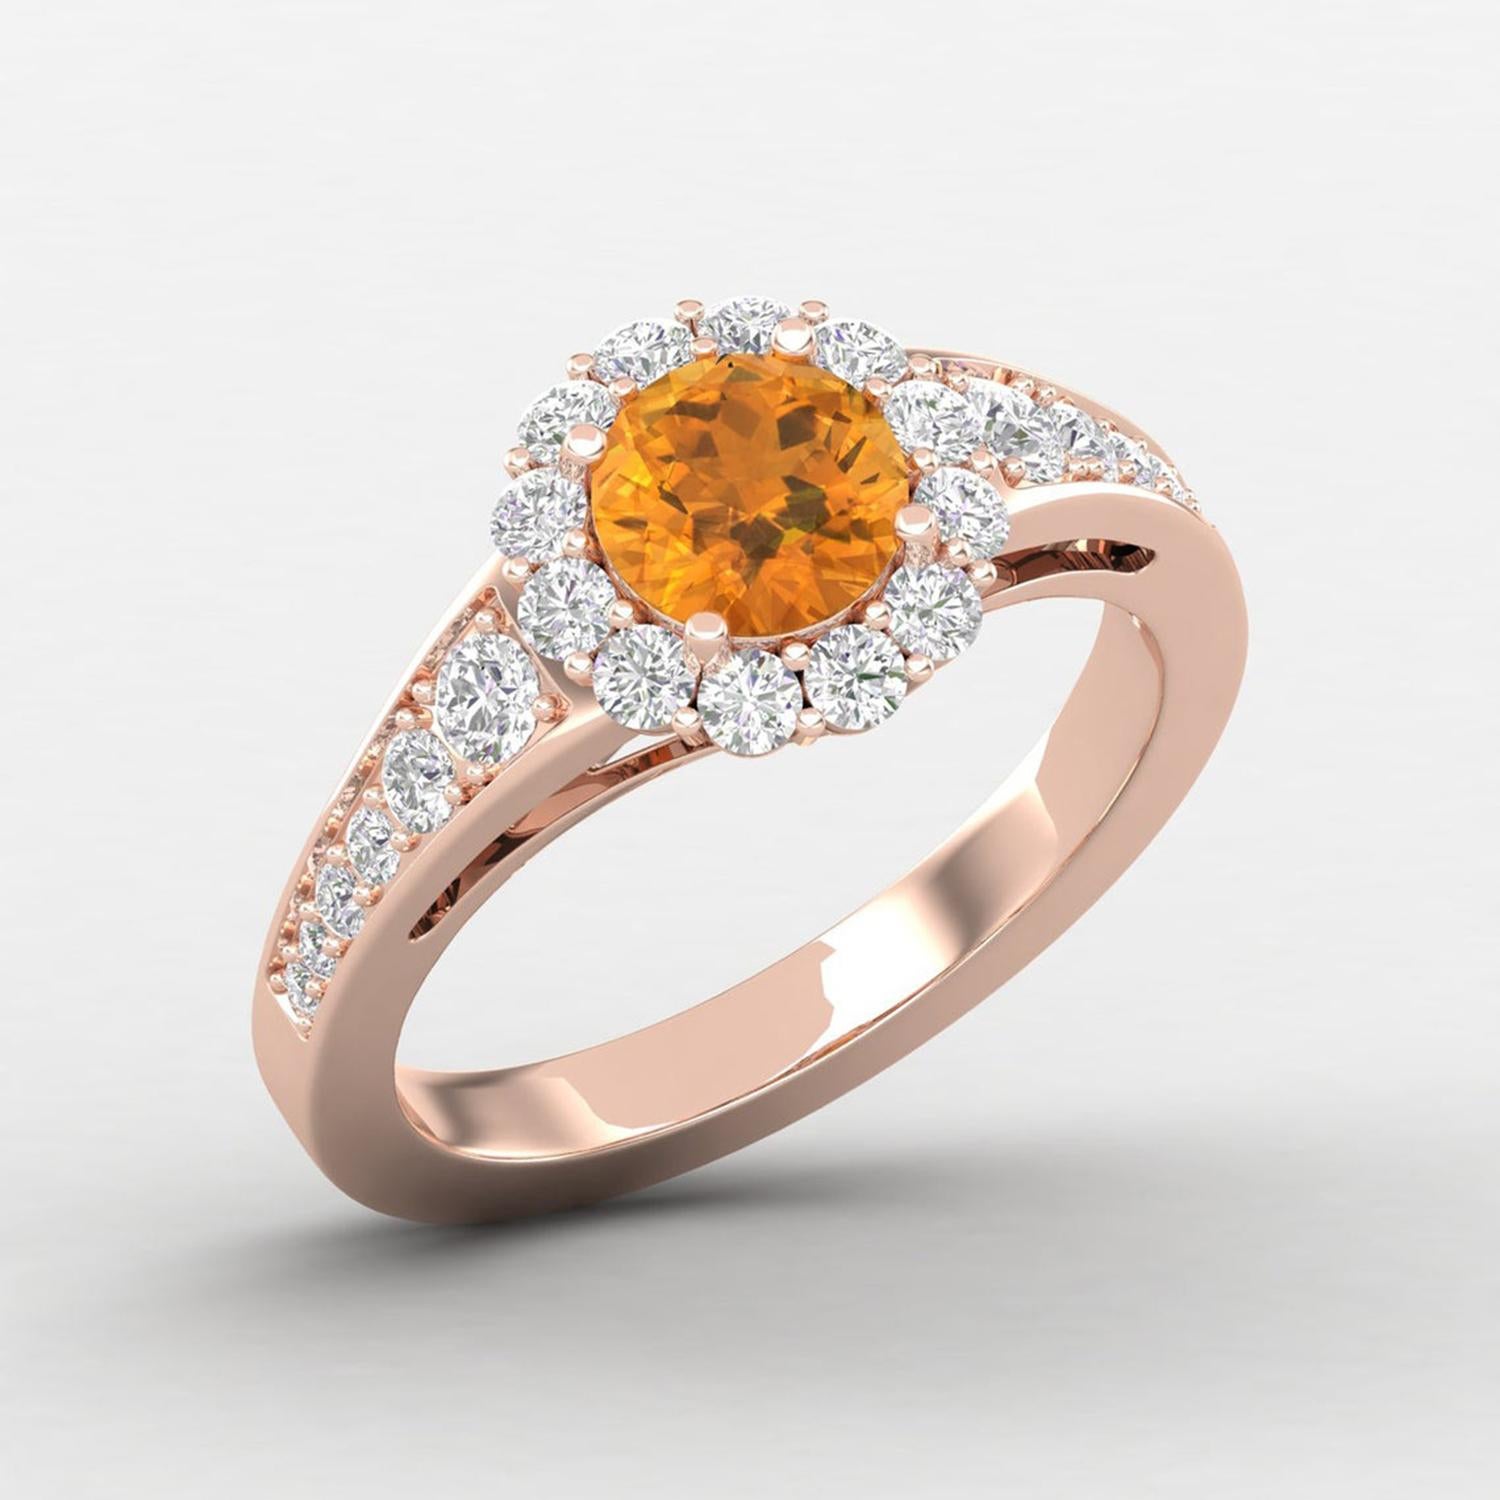 14 Karat Gold Citrine Ring / Round Diamond Ring / Solitaire Ring In New Condition For Sale In Jaipur, RJ